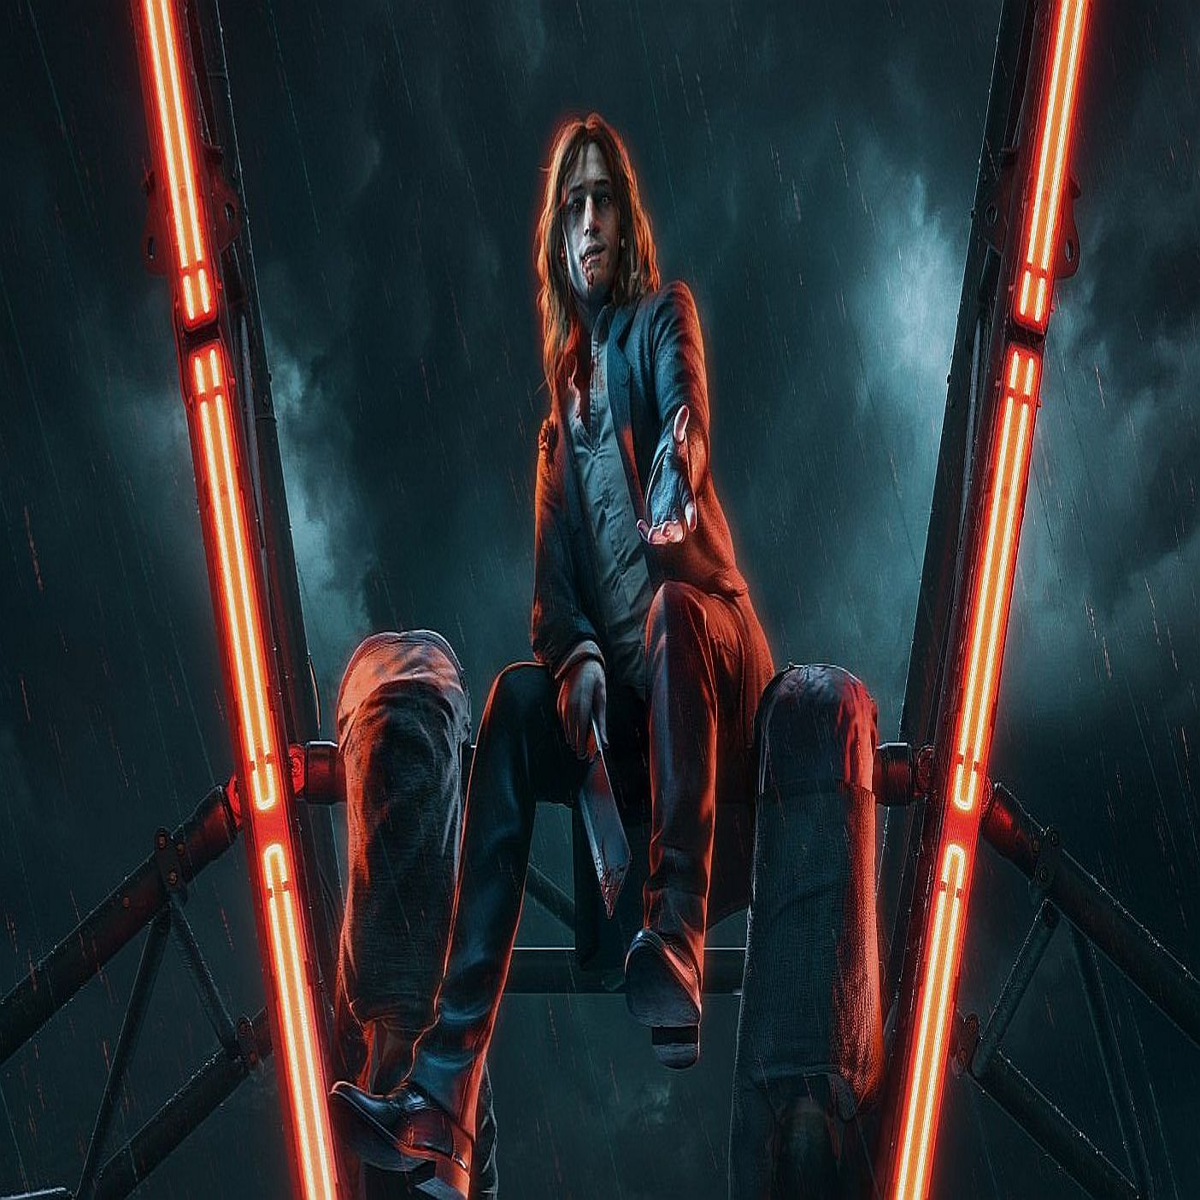 Vampire: The Masquerade – Bloodlines 2 Details Its Thinblood